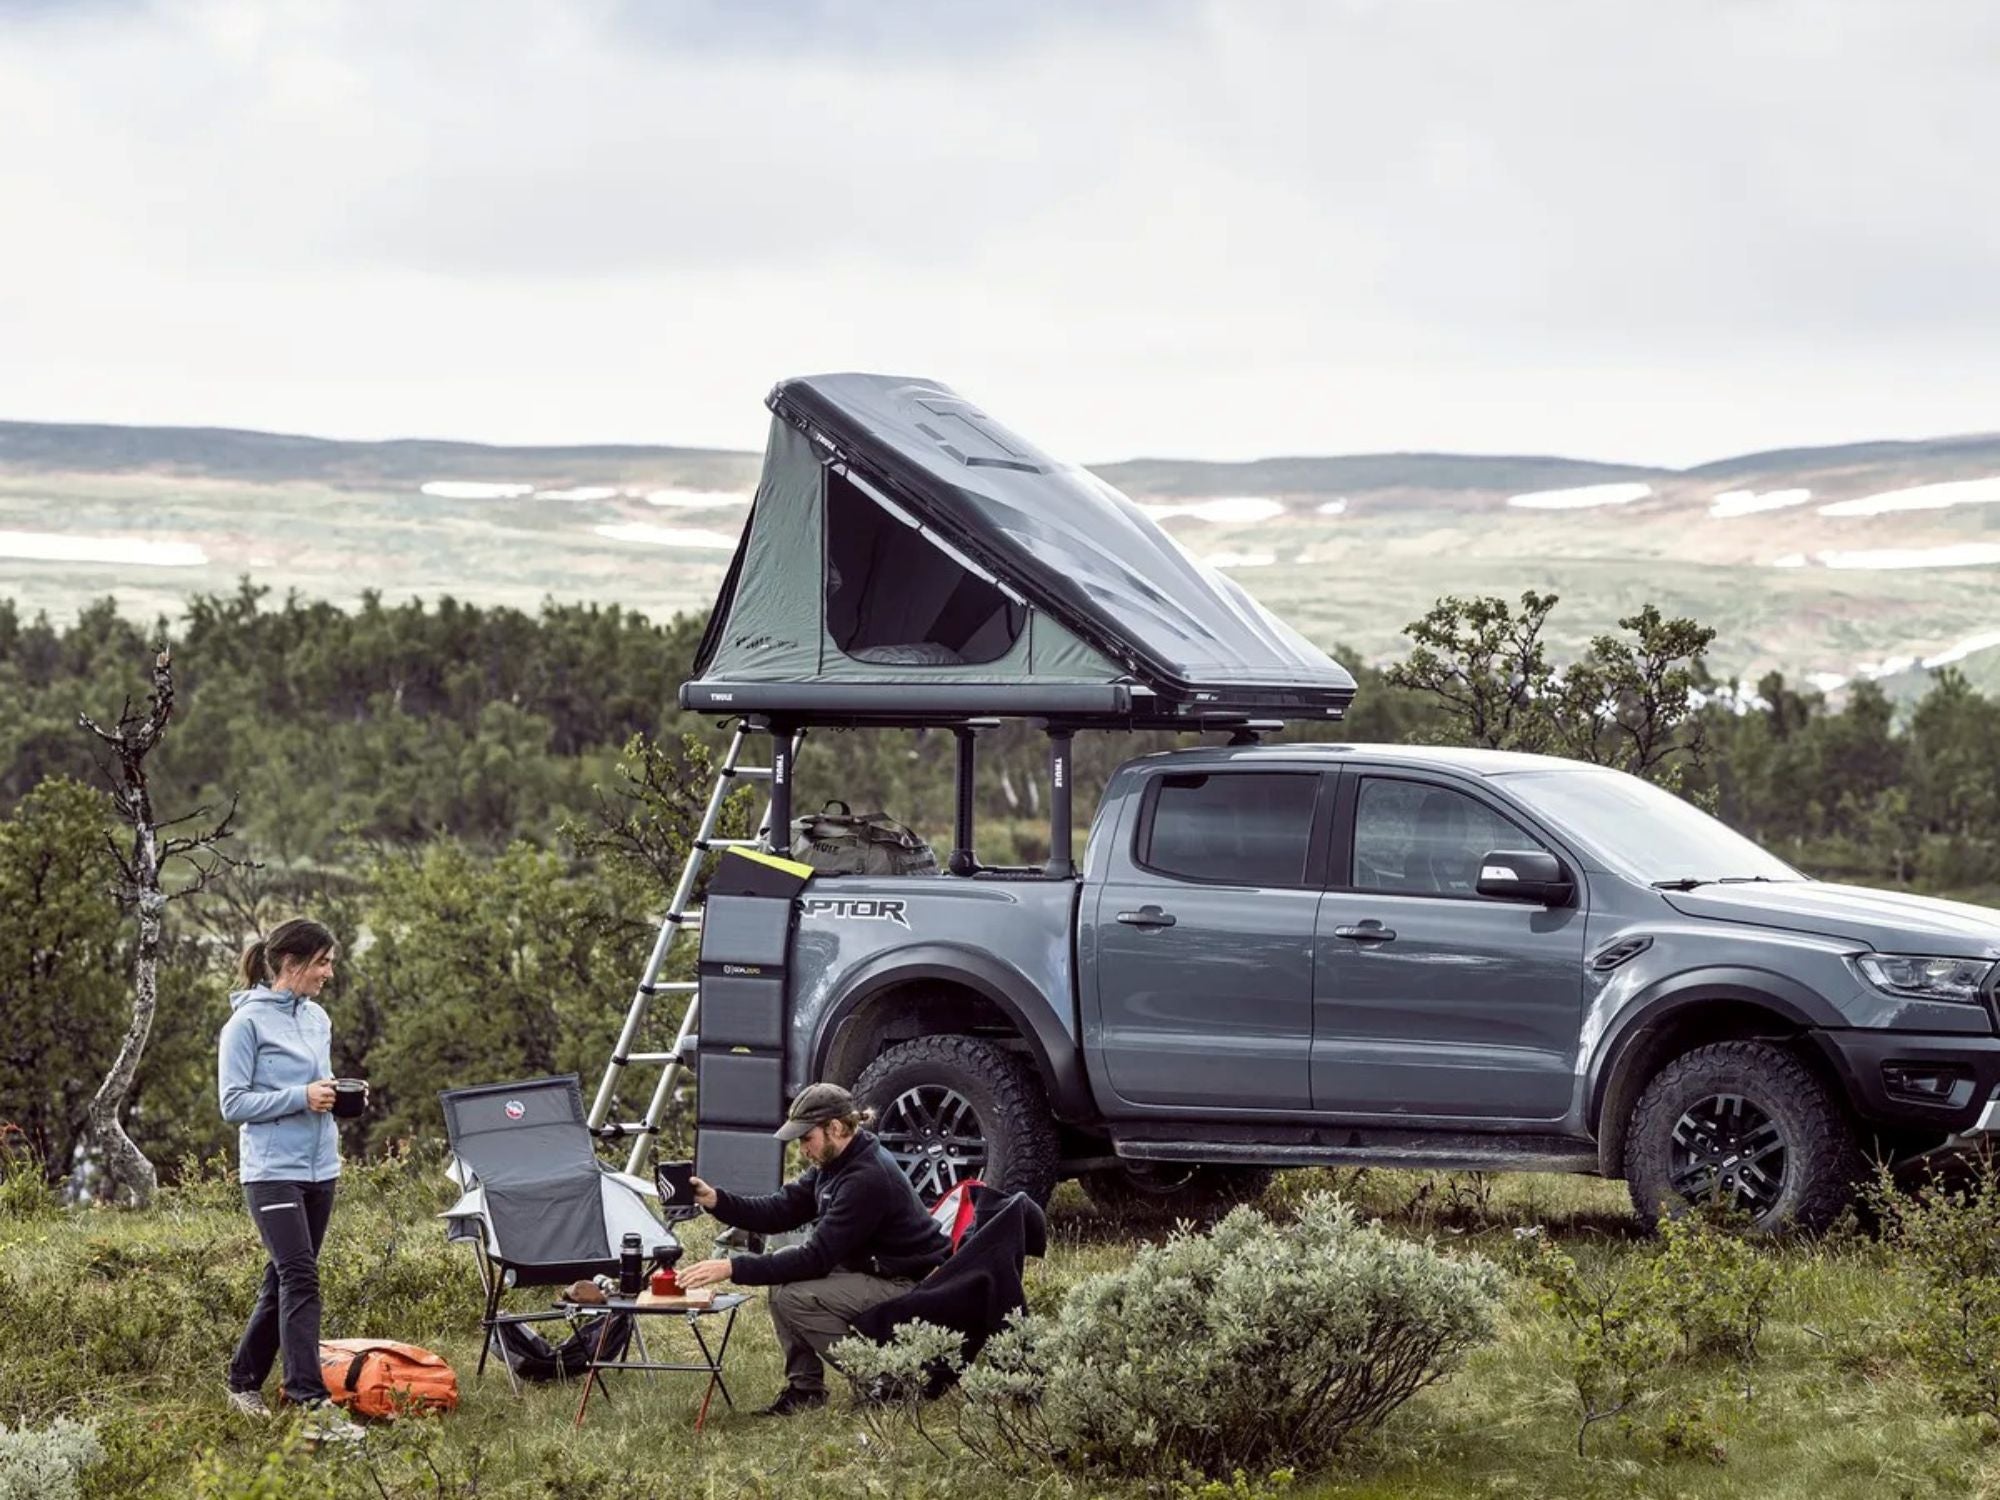 Thule Rooftop Tent Organizer, Thule